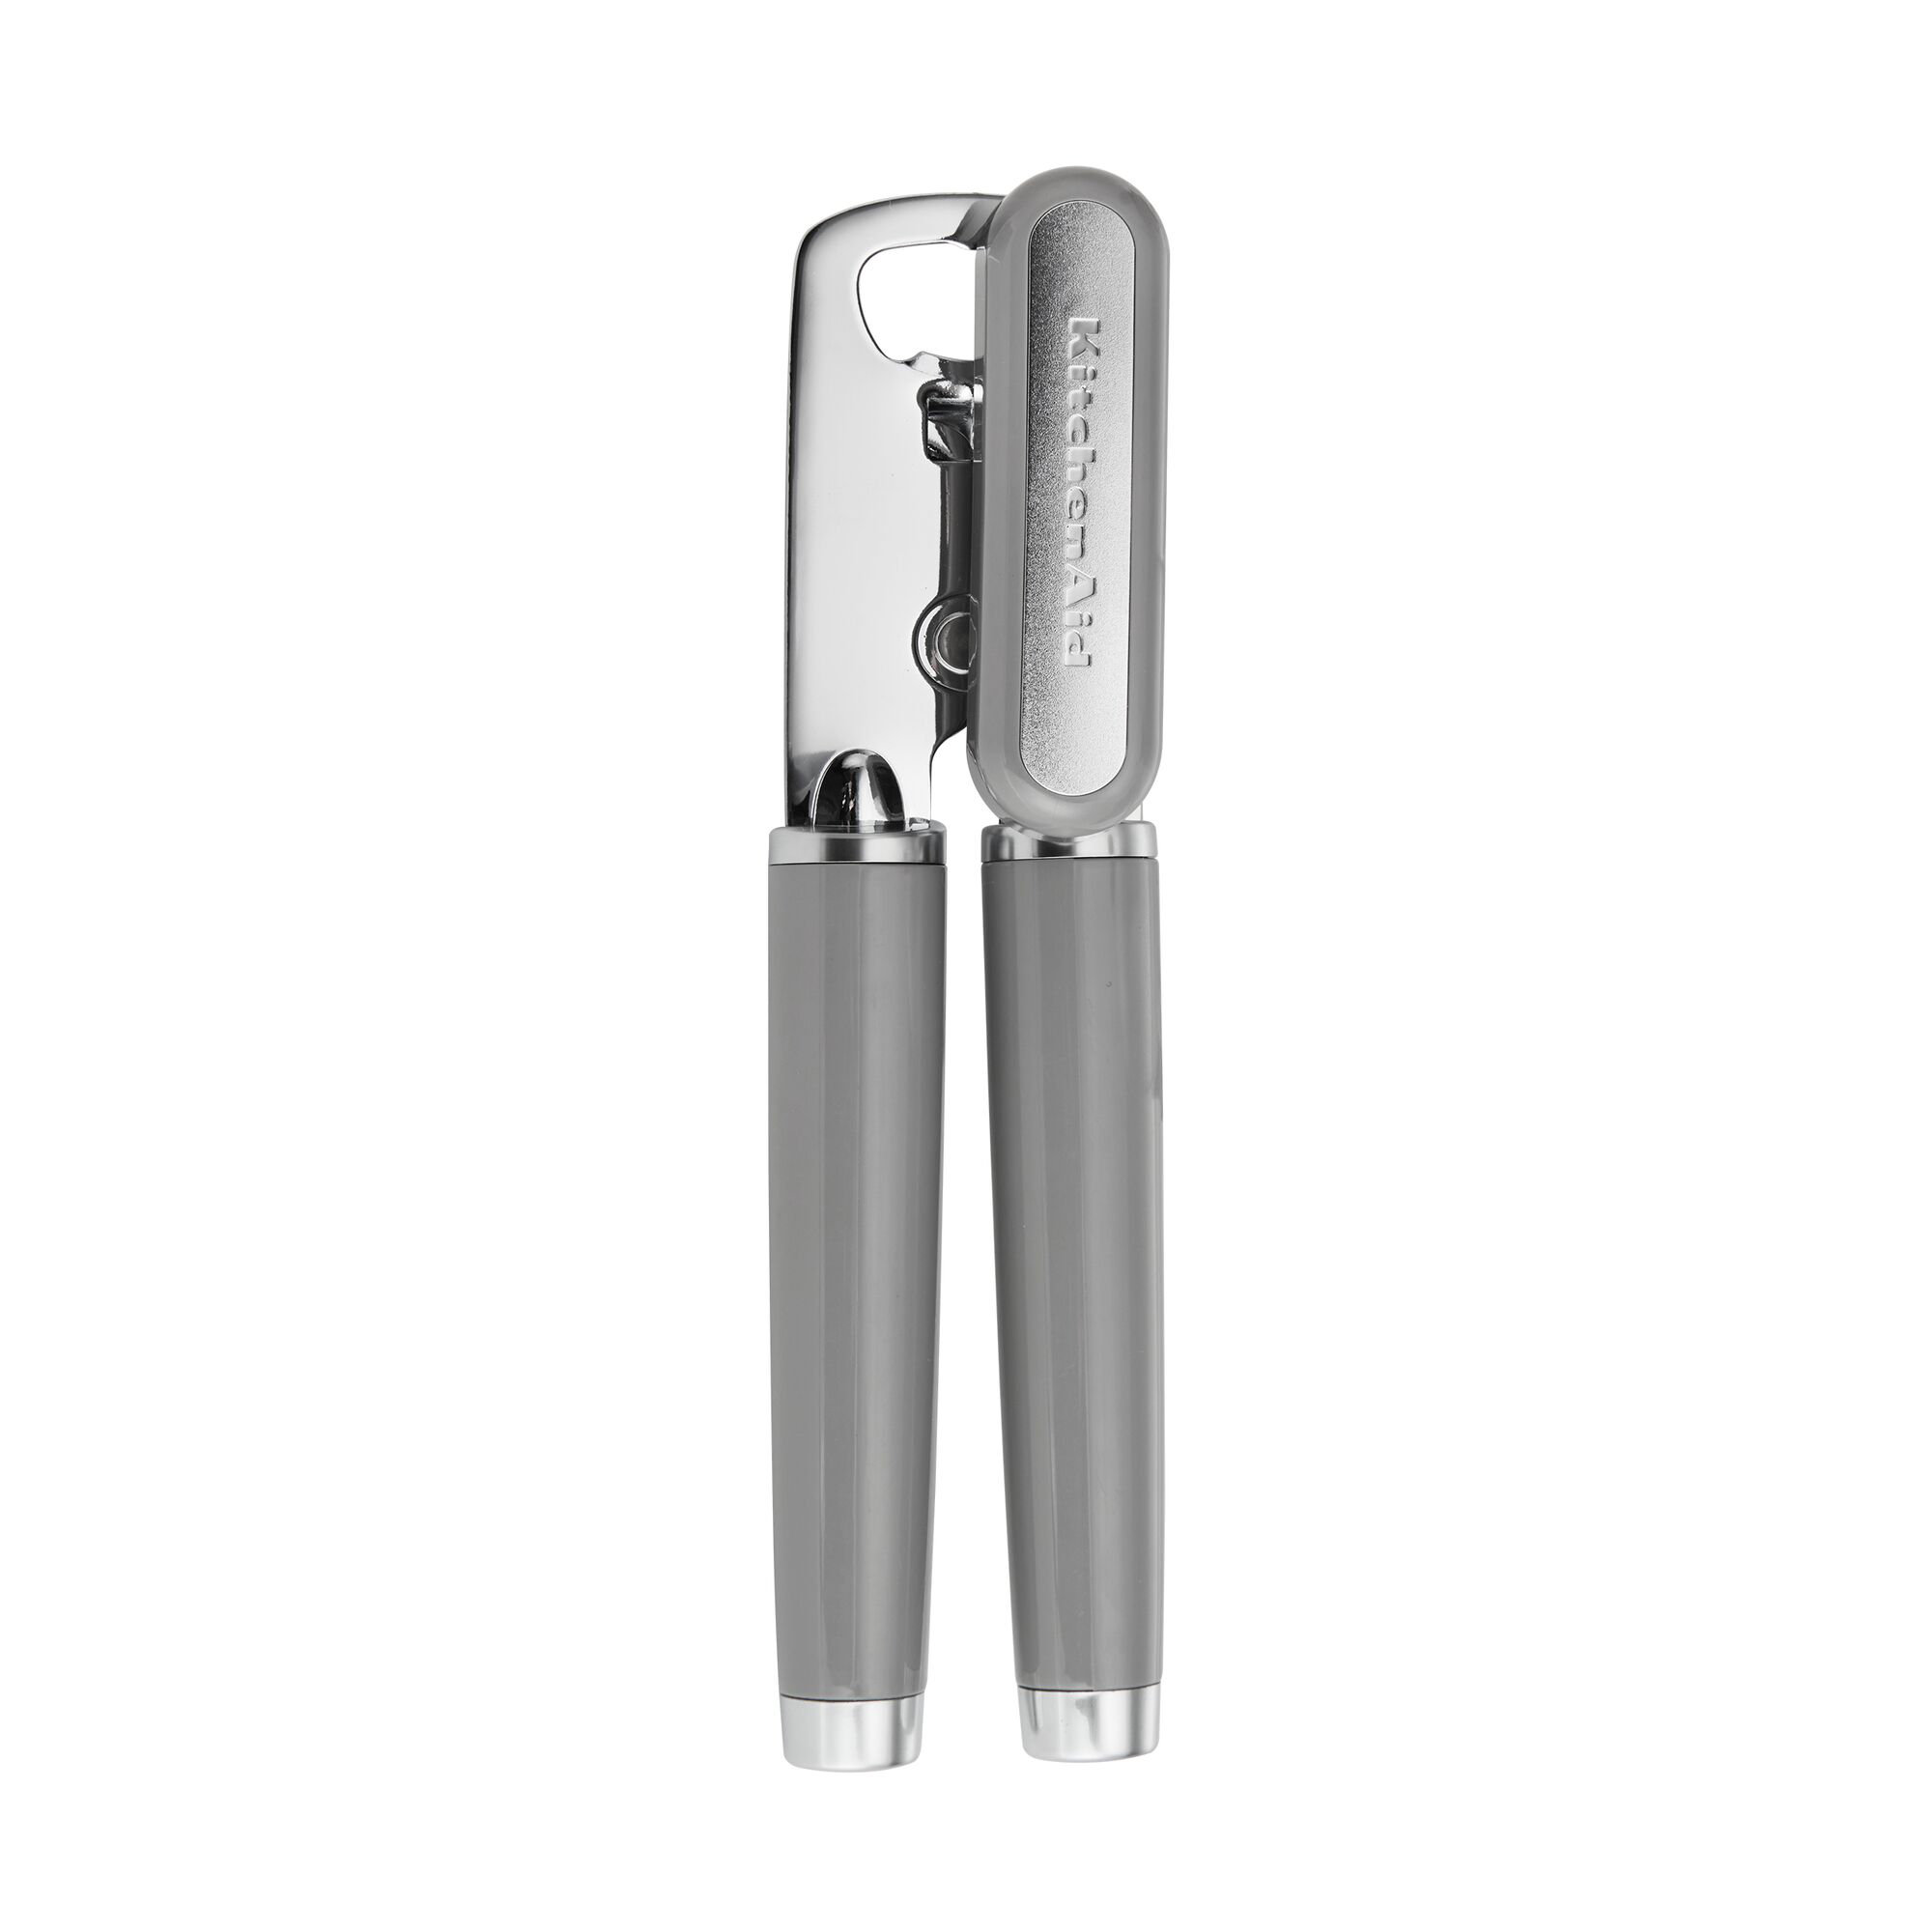 Home Basics Stainless Steel 3-in-1 Manual Can Opener, Silver